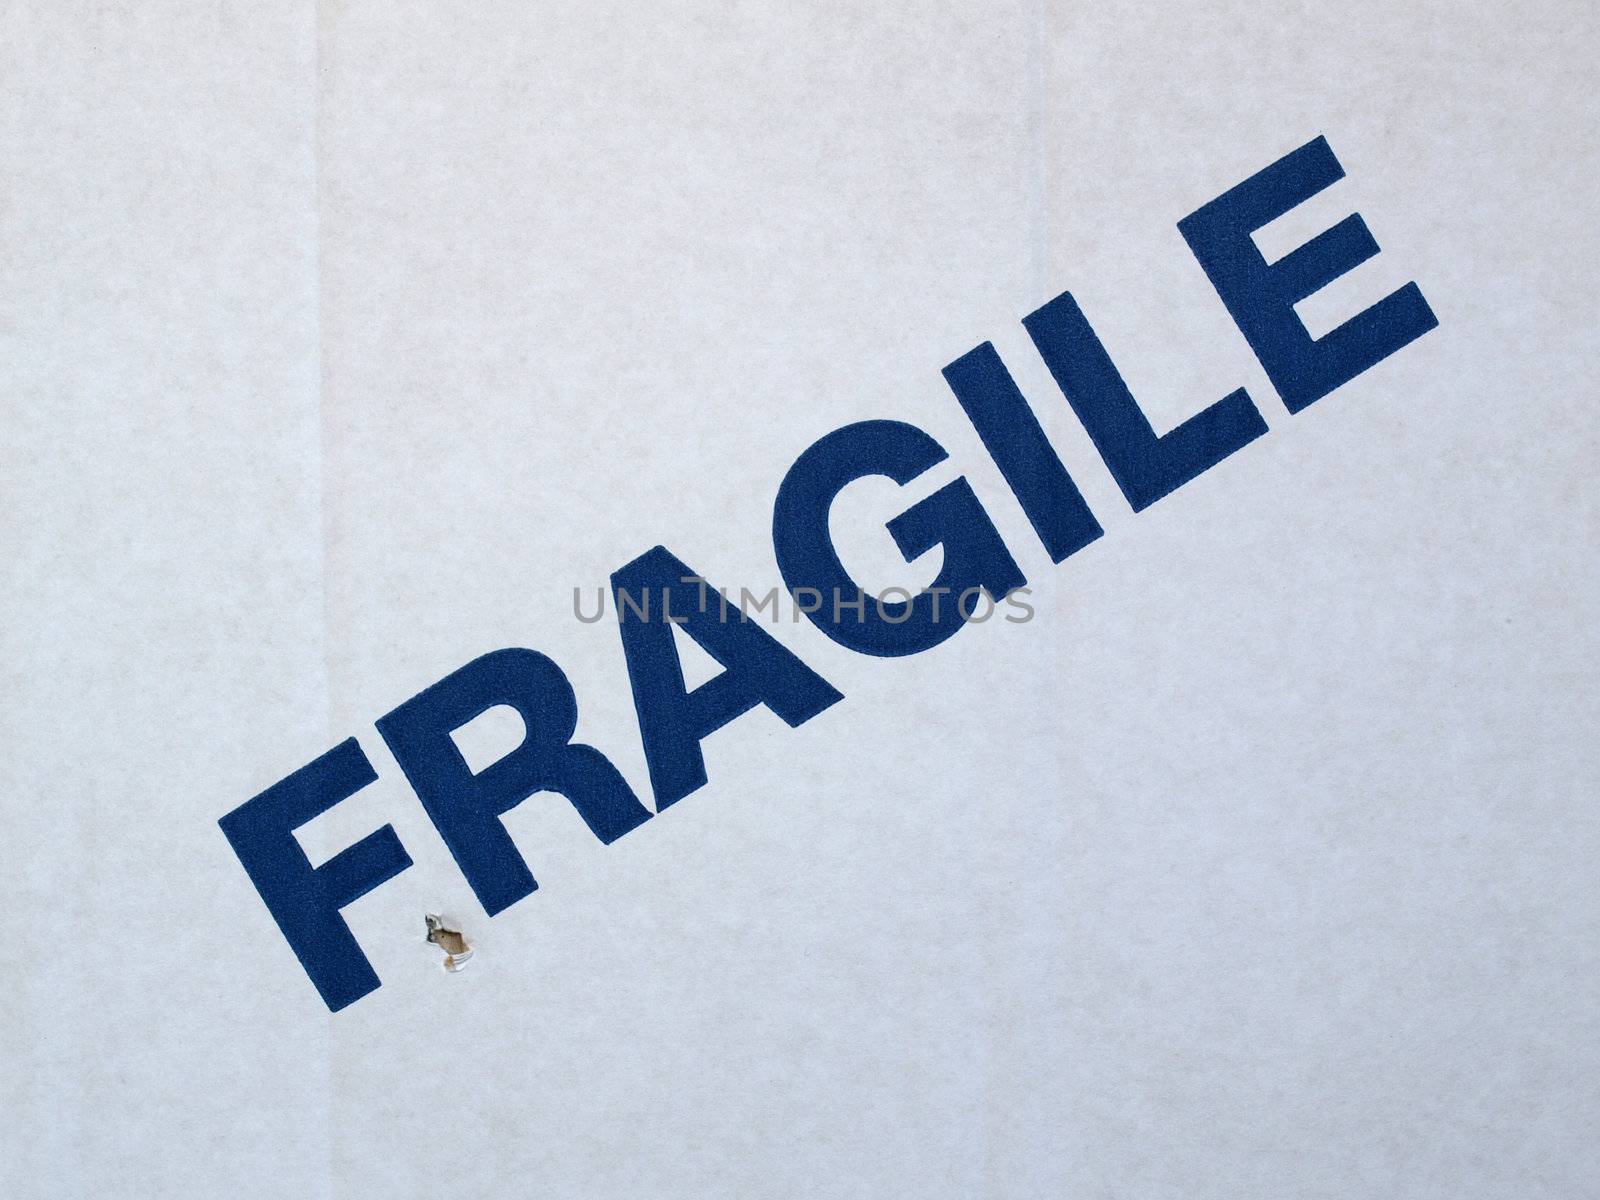 Fragile warning sign on a cardboard box for shipping